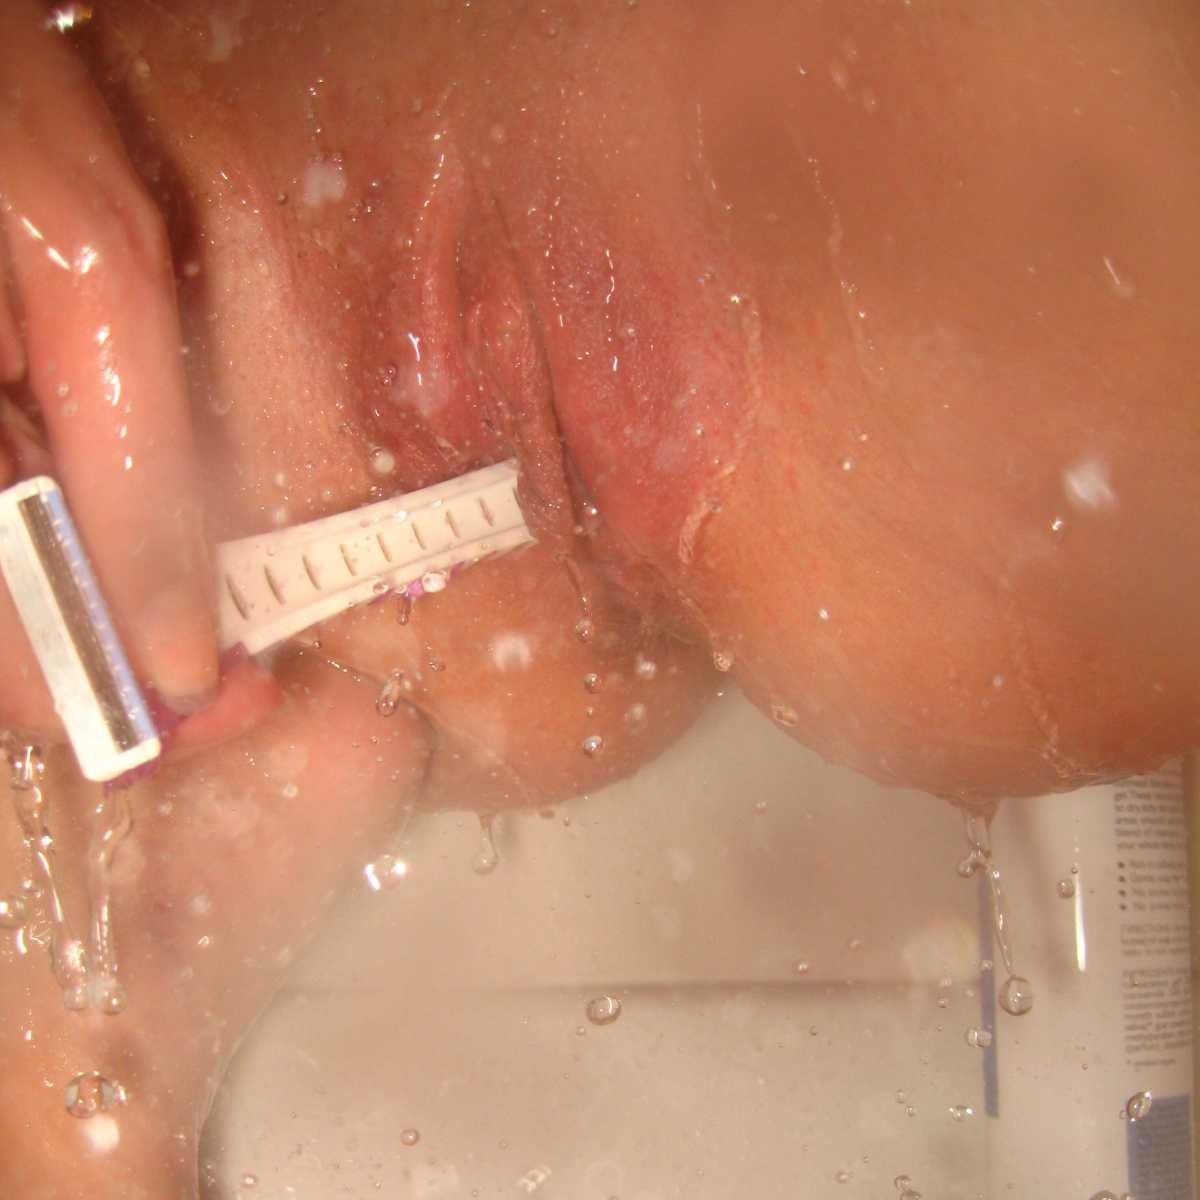 Julie fucks a razor in the shower very daring hope everything comes out alright  #77141722